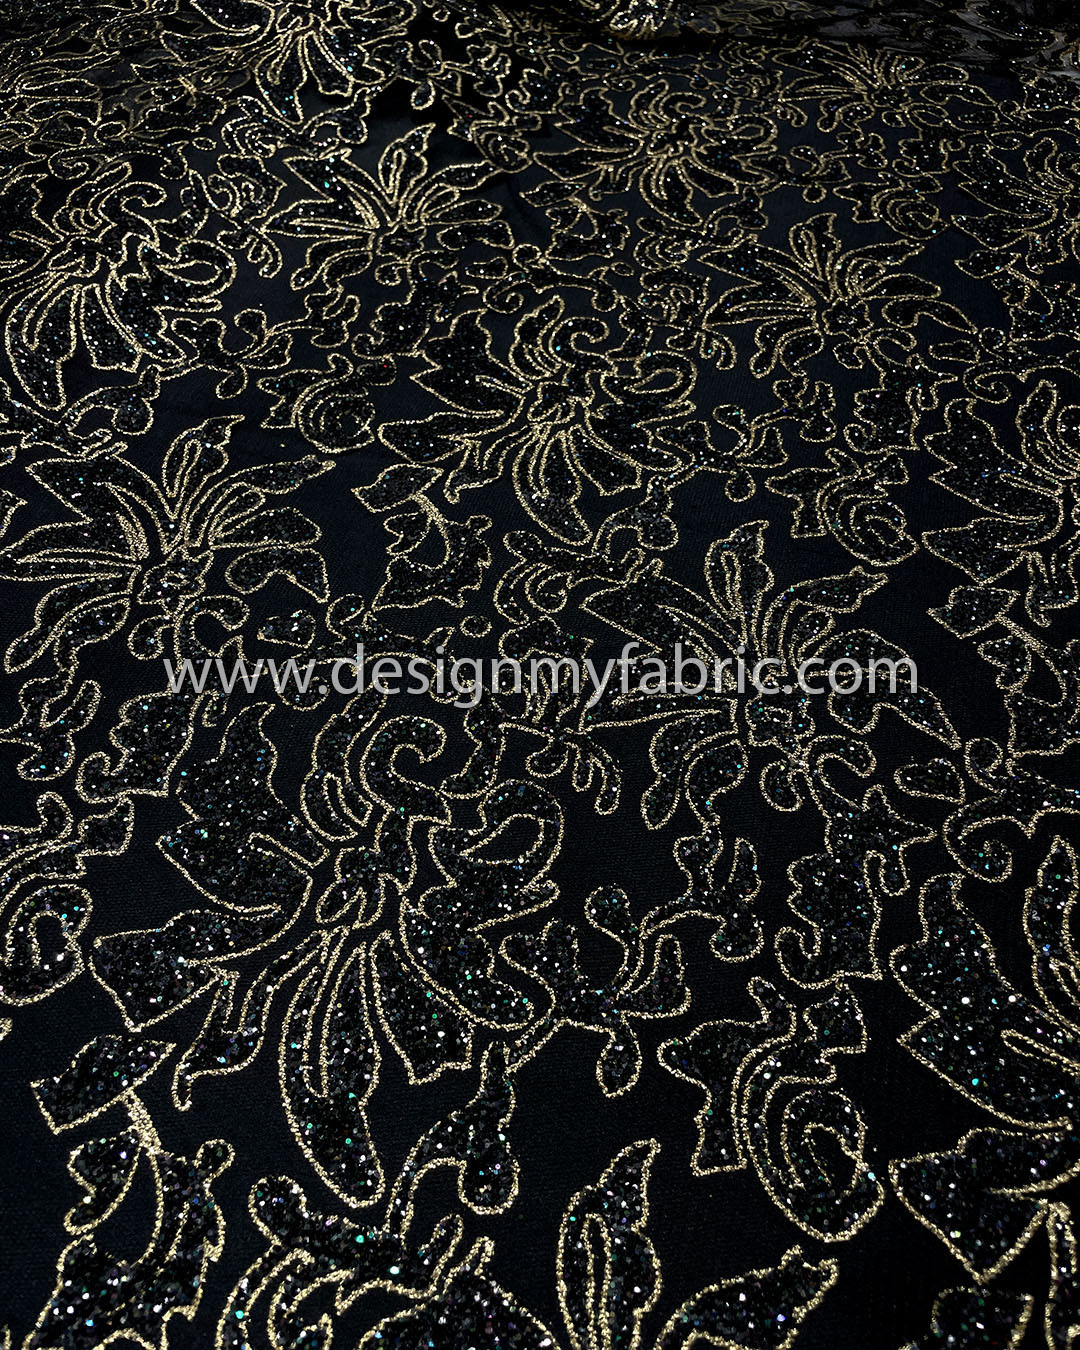 Brocade fabric with gold-black lace